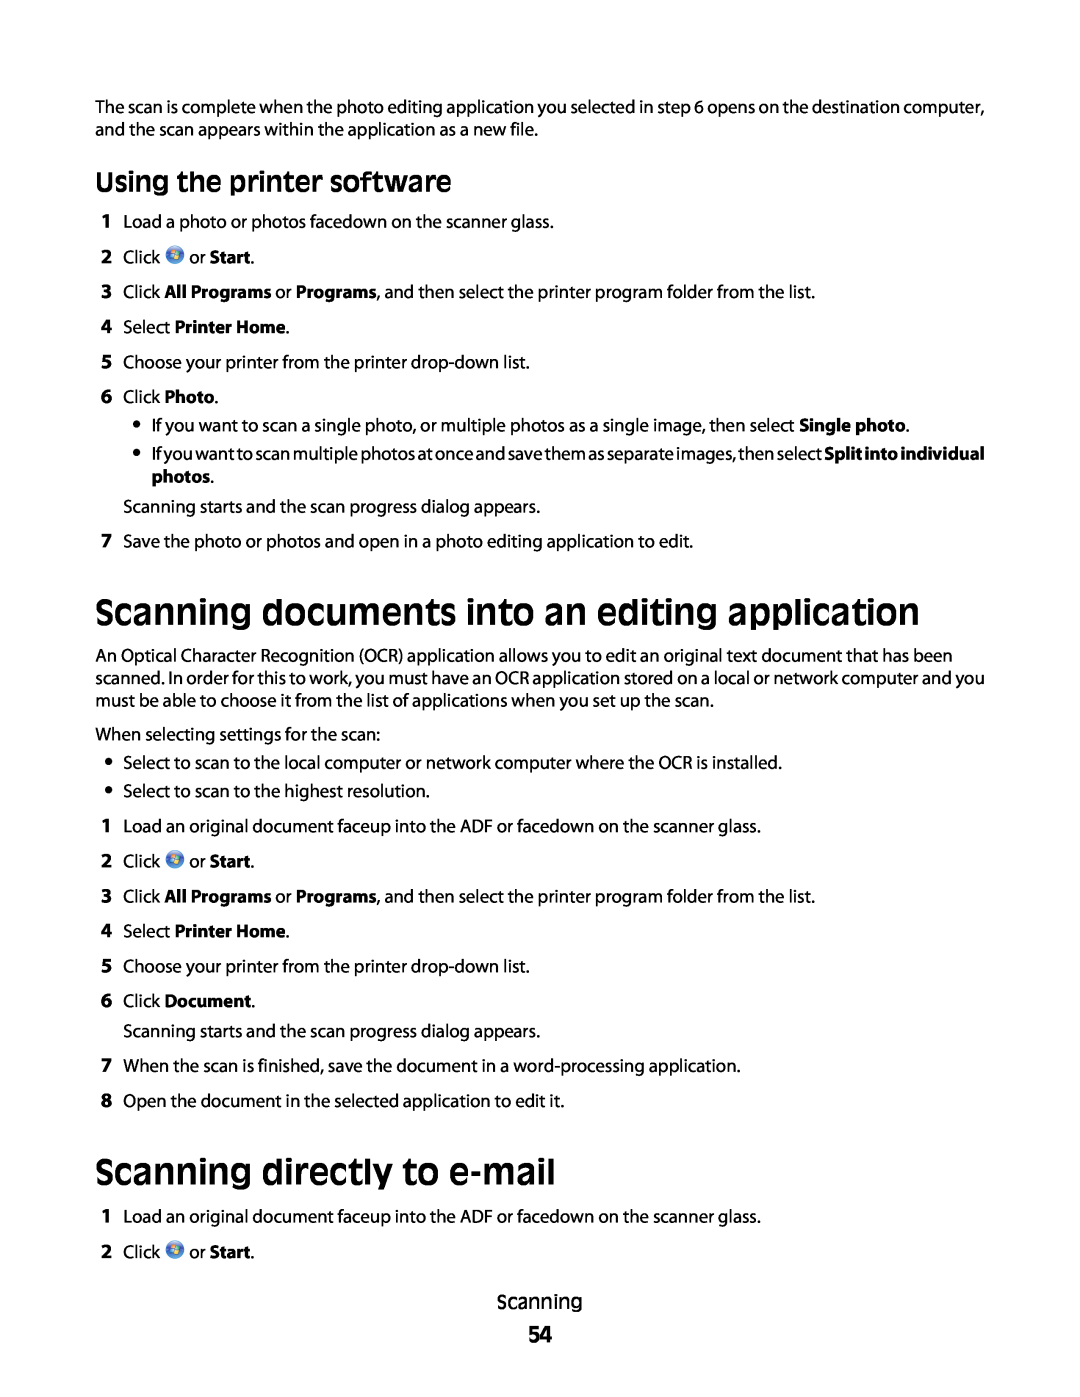 Dell V515W manual Scanning documents into an editing application, Scanning directly to e-mail, Using the printer software 